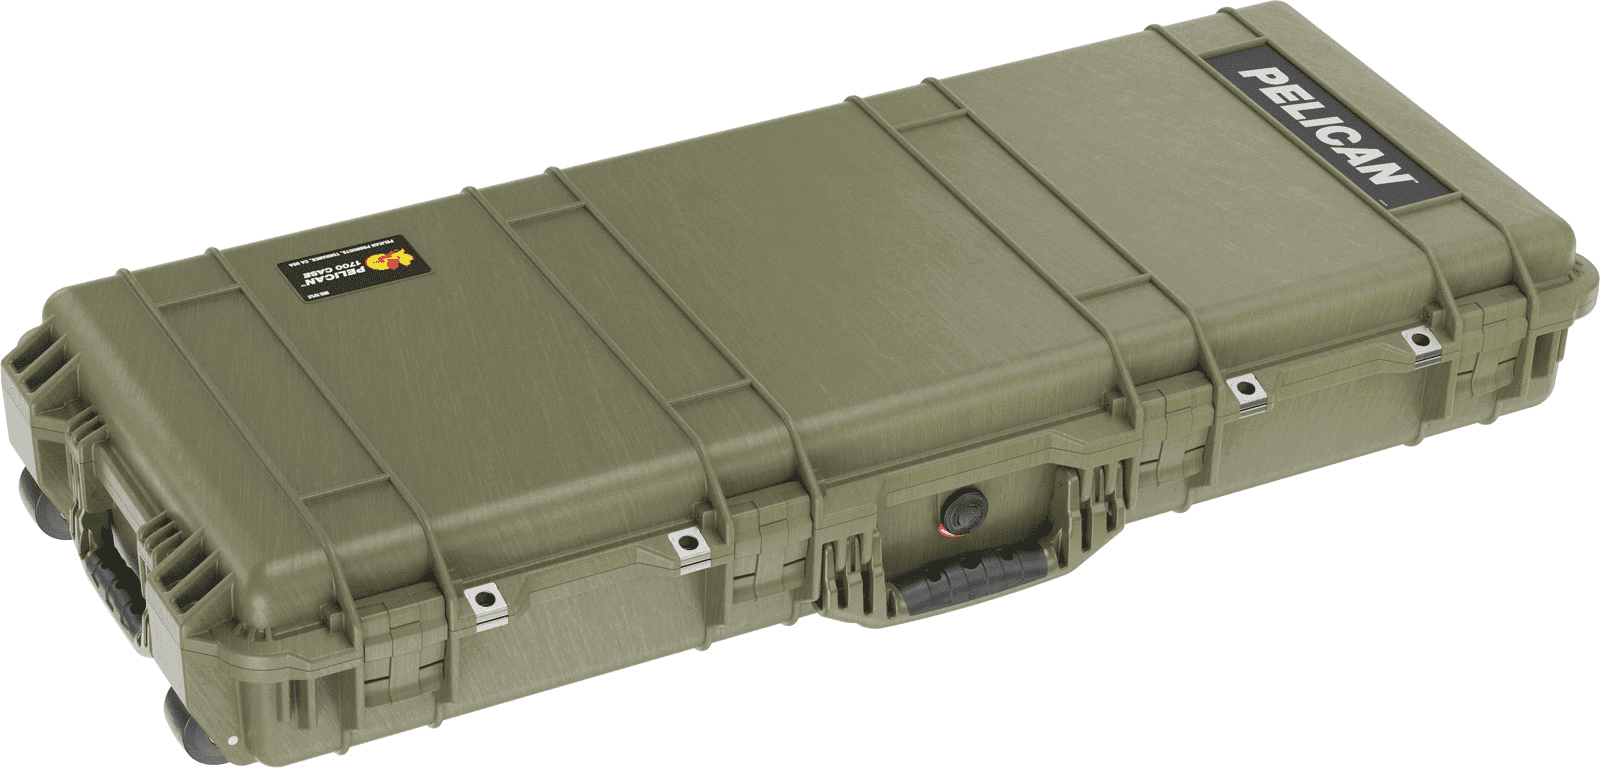 Pelican Products 1750 Protector Long Case - OD Green, Foam